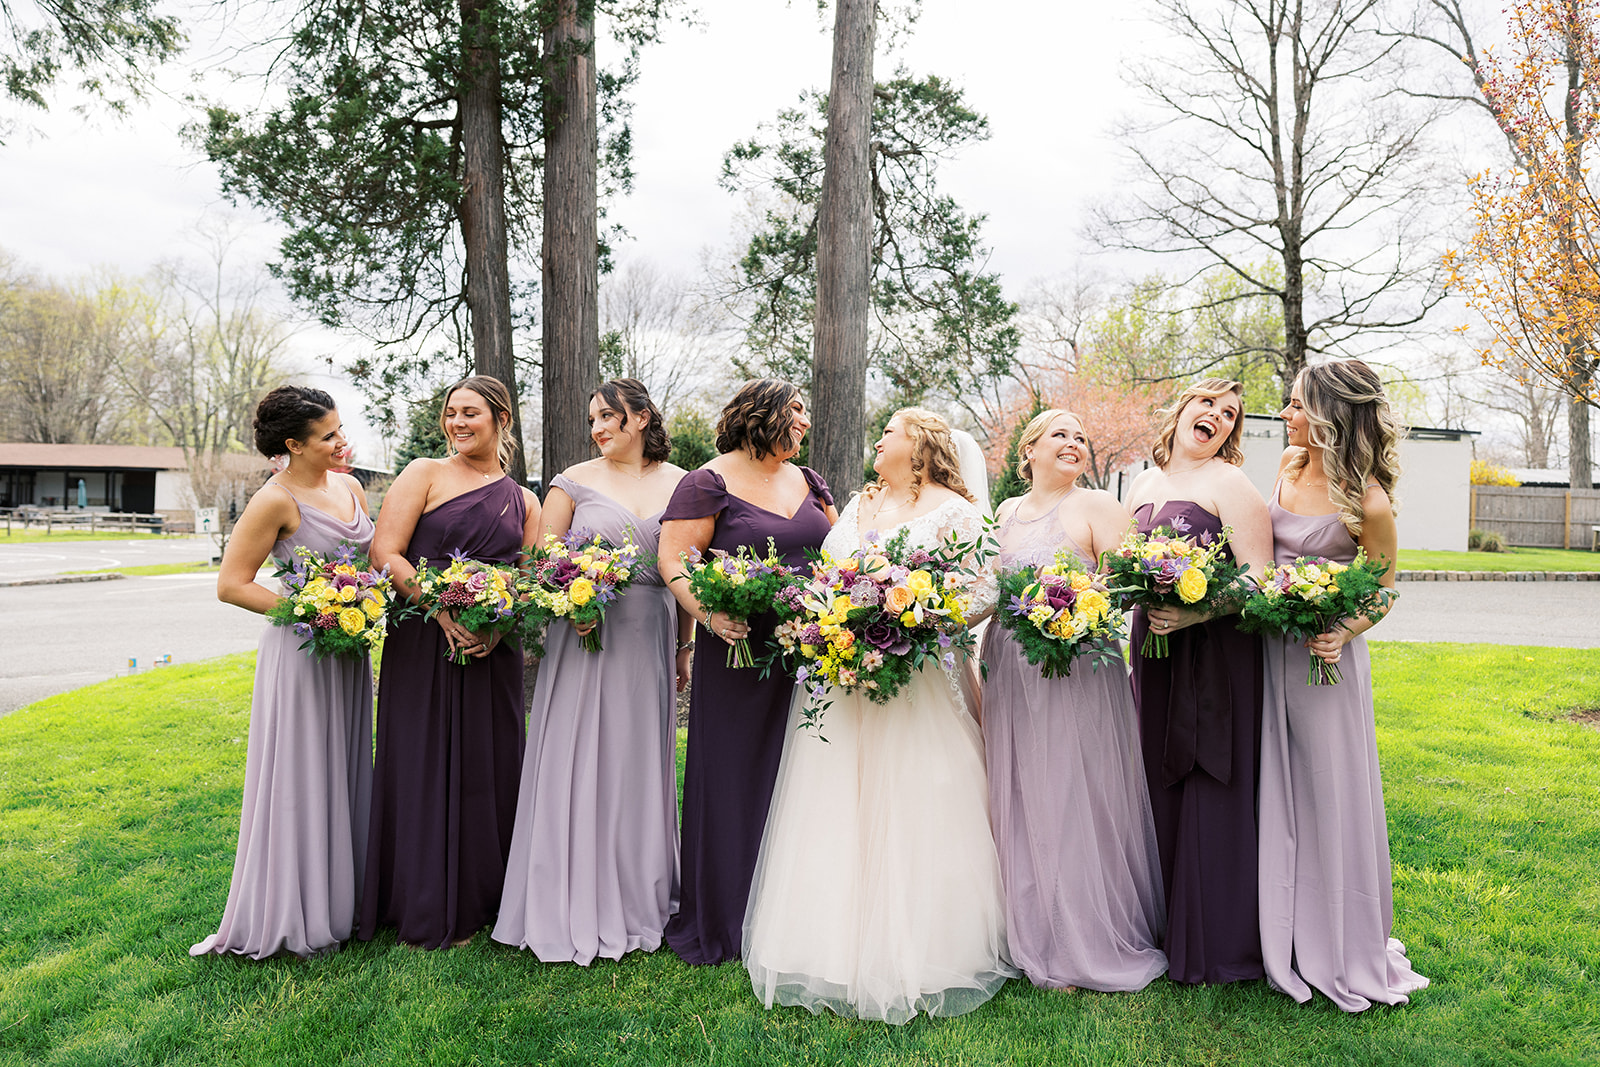 A bride stands in a grassy lawn under some trees laughing with her bridesmaids in purple dresses at her Forest Lodge Wedding